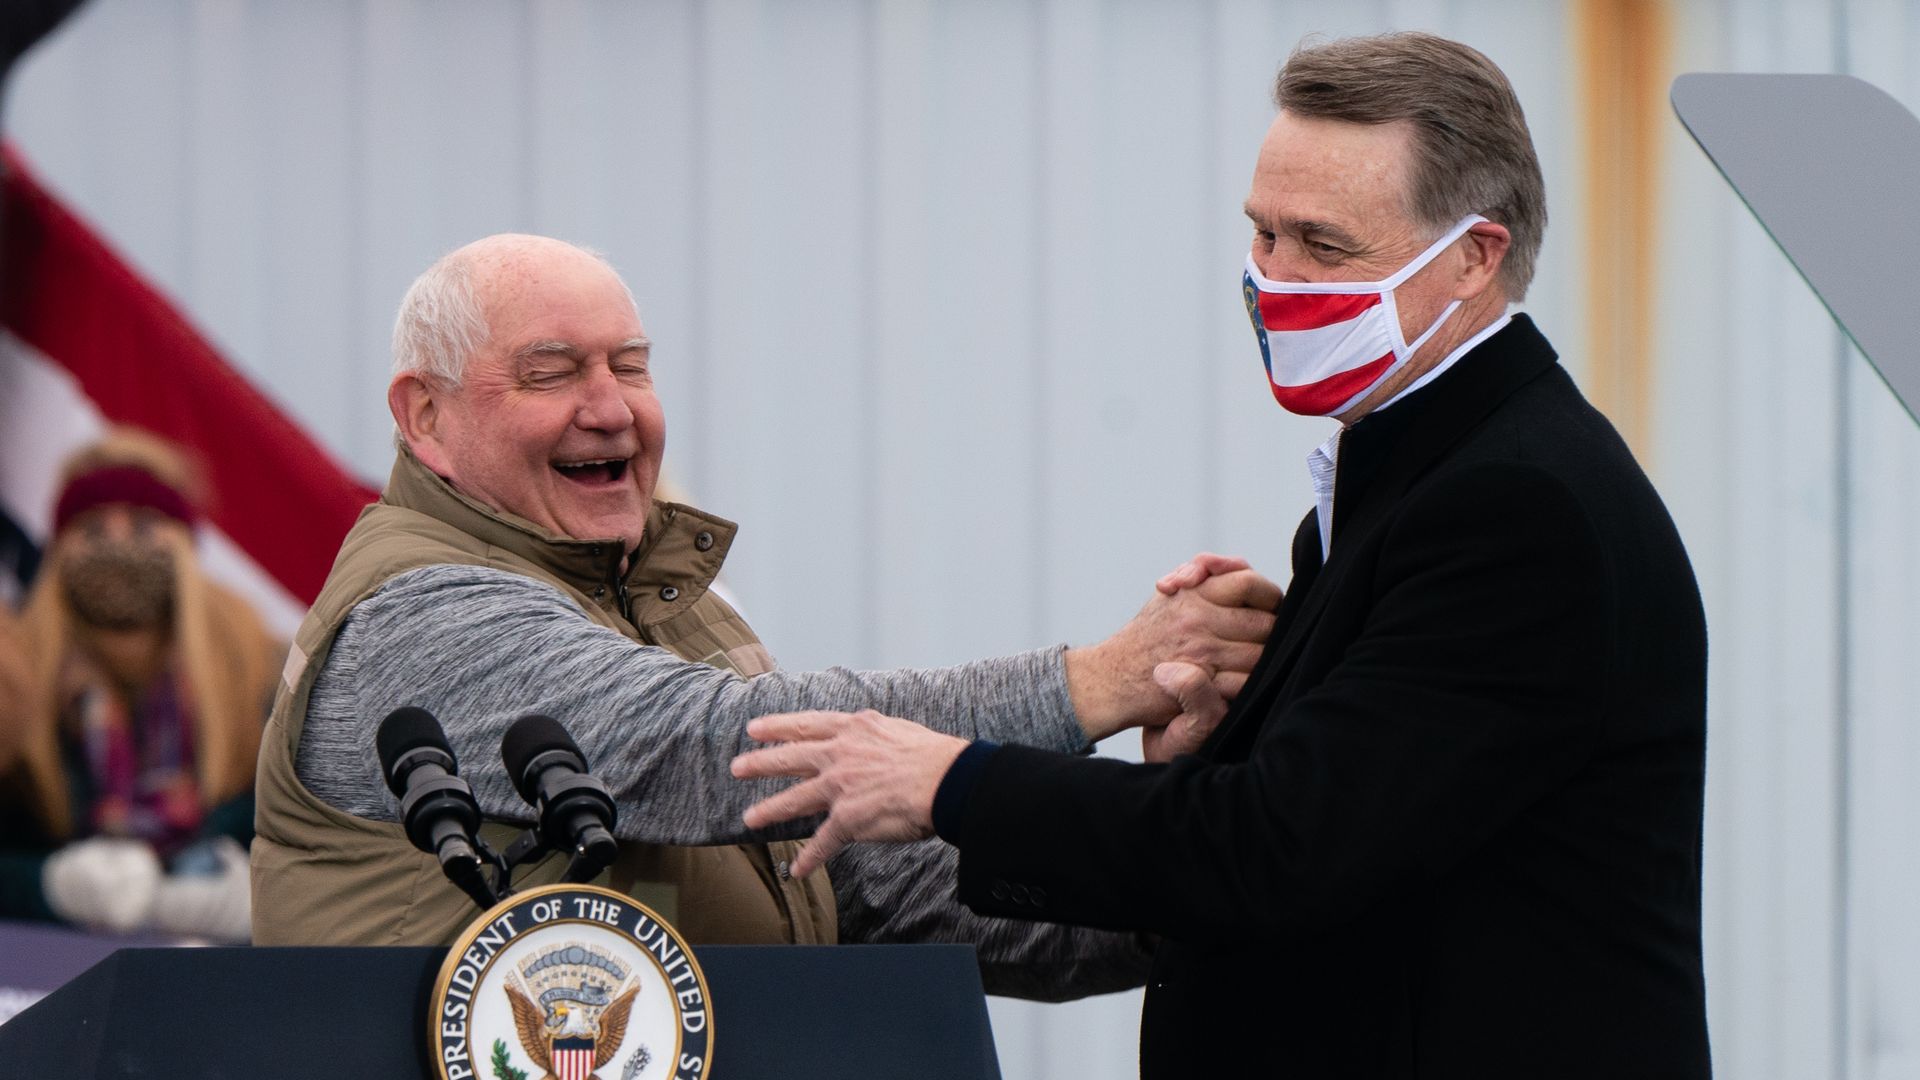 Sonny and David Perdue laughing and shaking hands